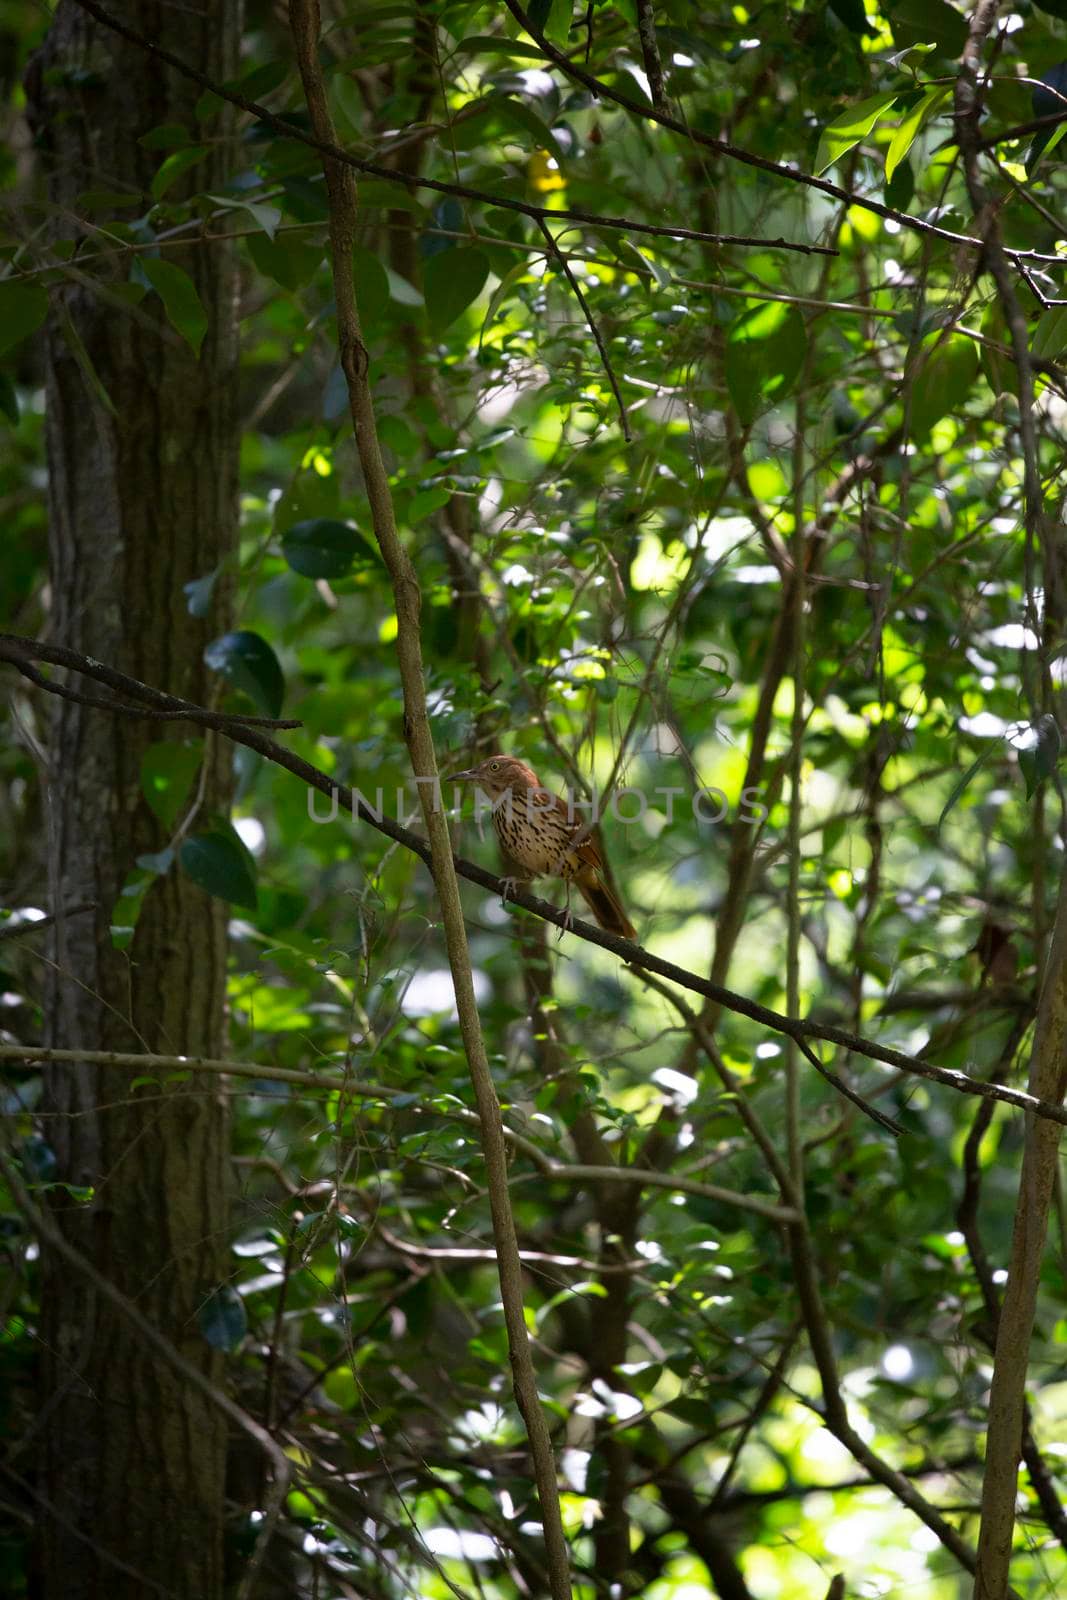 Curious brown thrasher (Toxostoma rufum) looking around from its perch on a limb